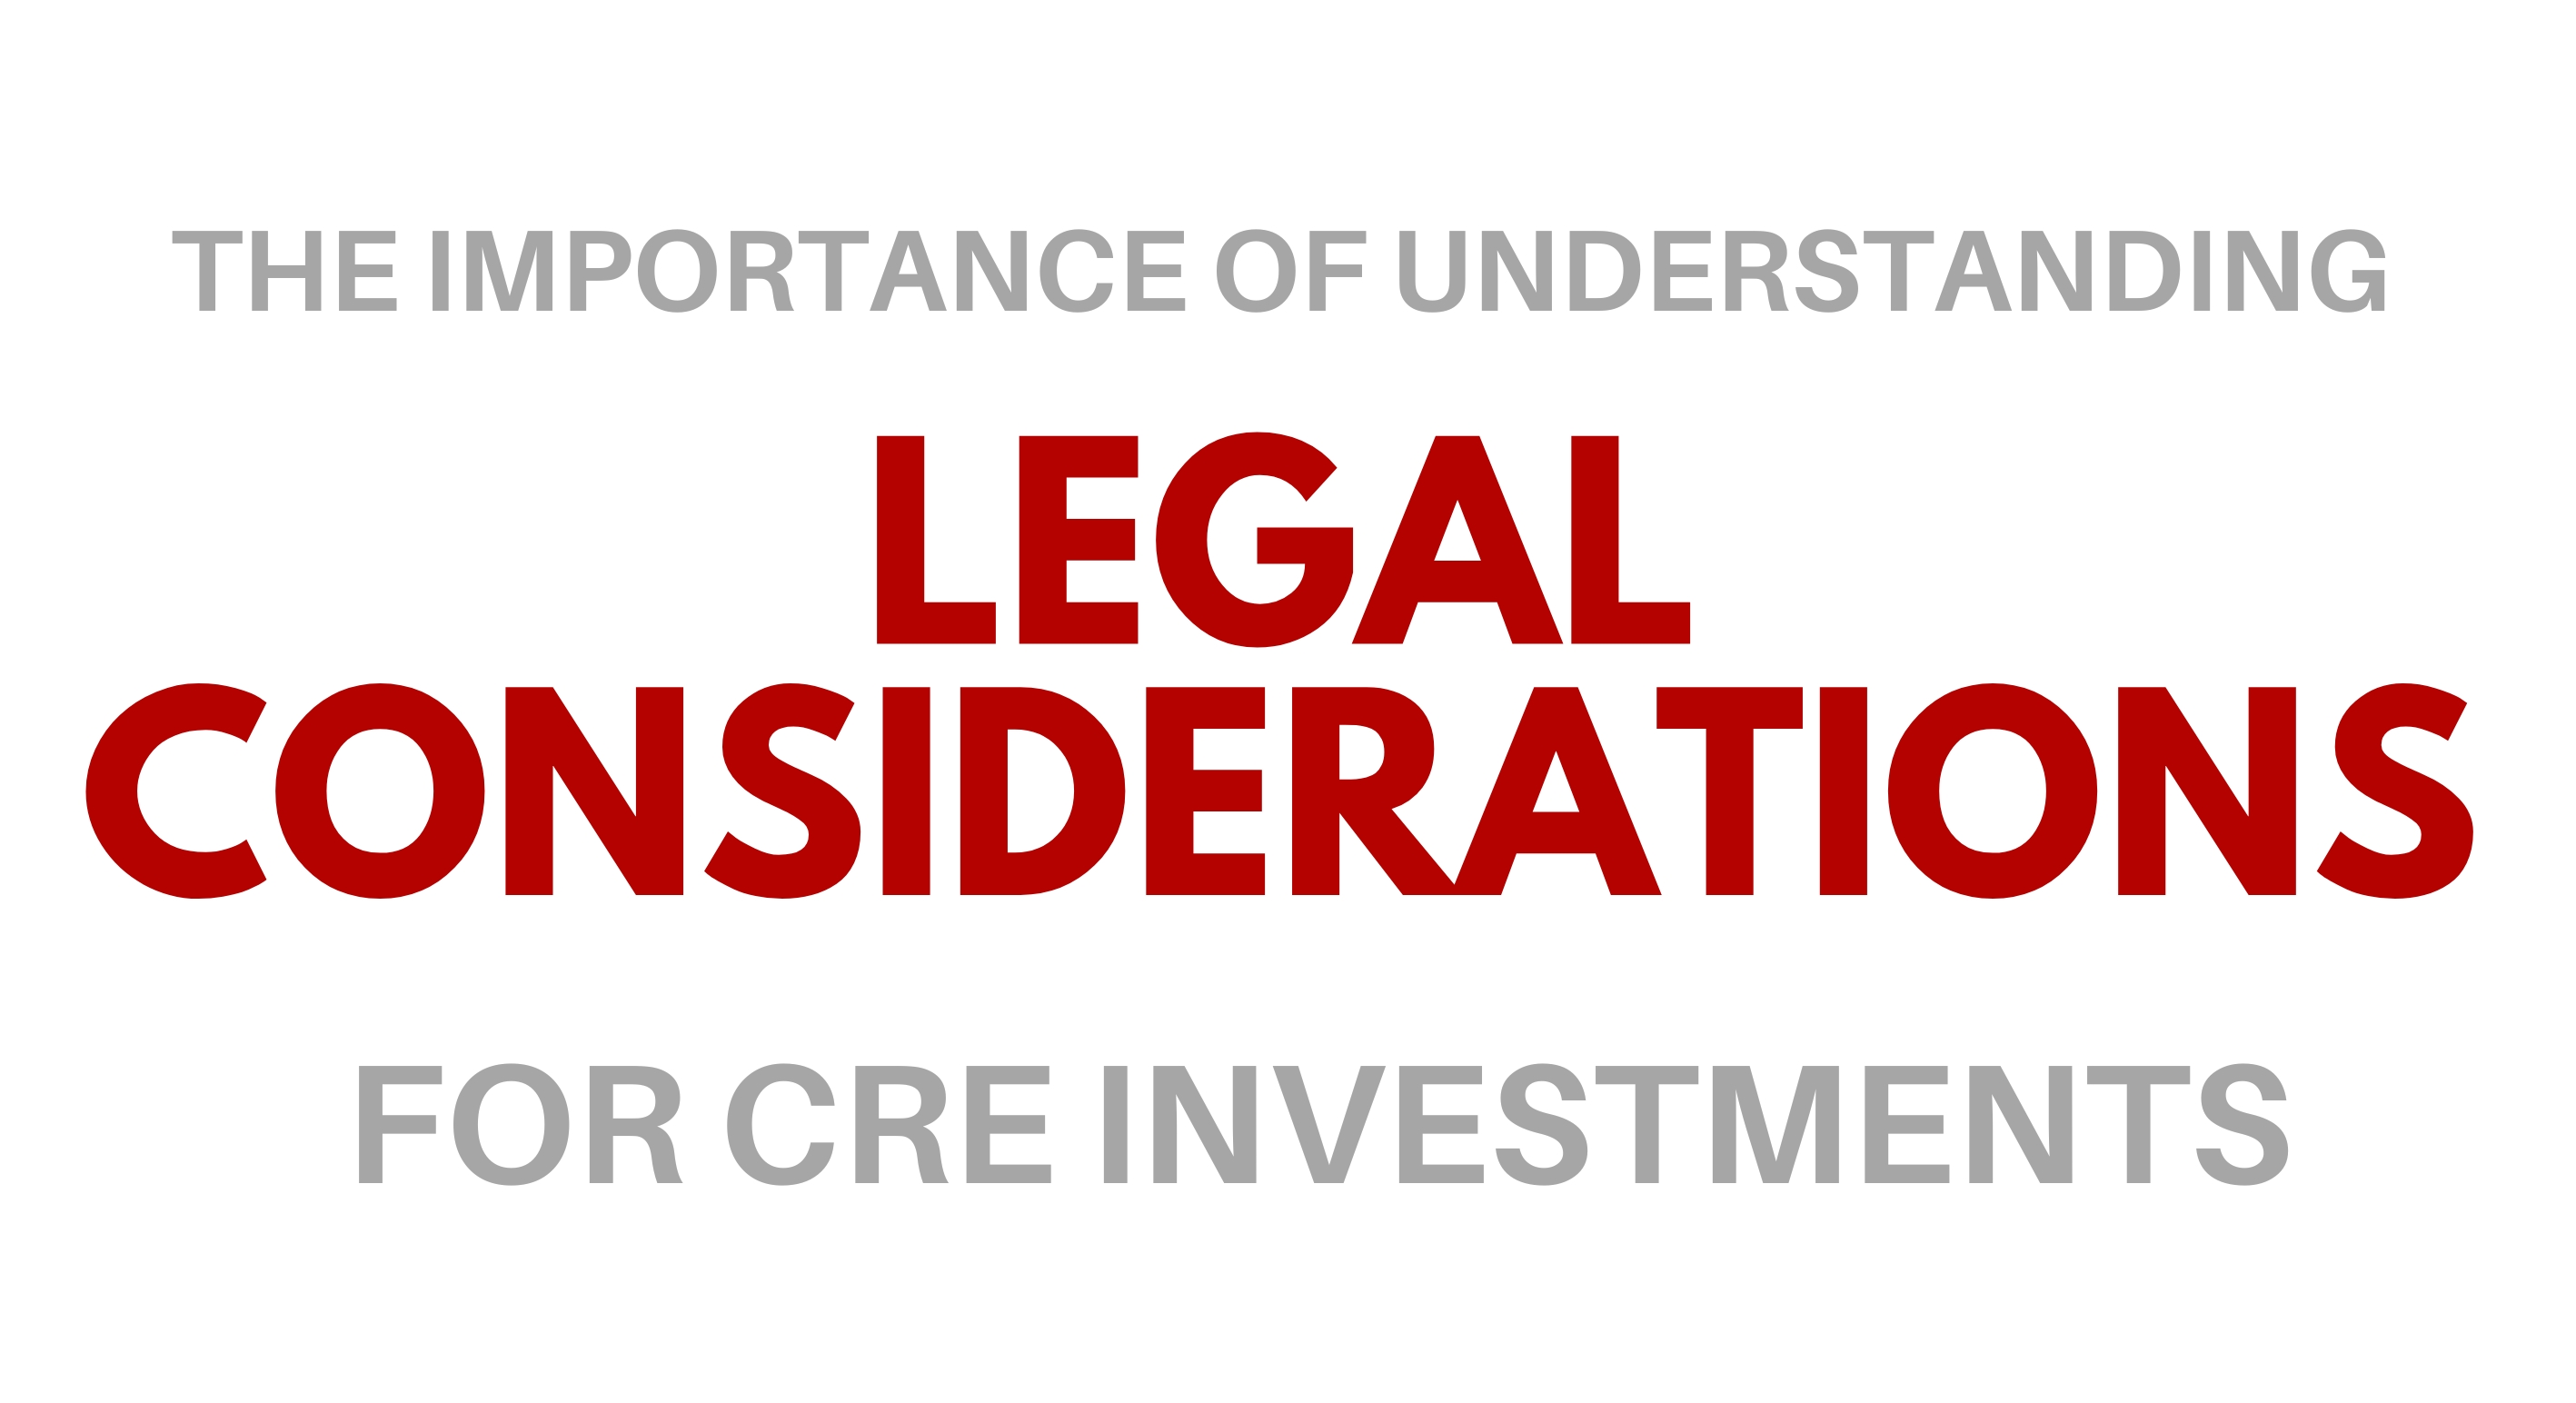 Understanding legal considerations for commercial real estate investments